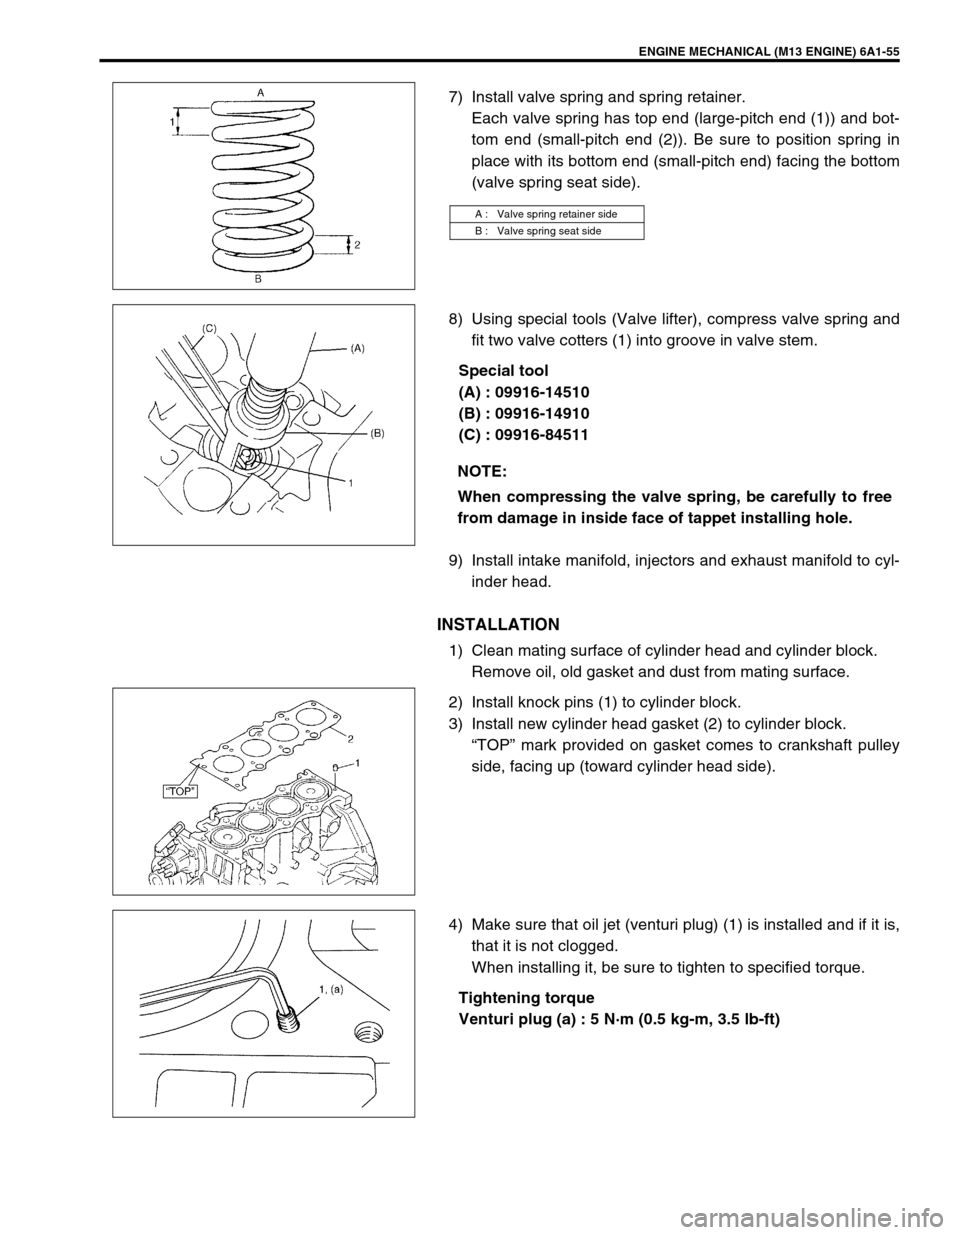 SUZUKI SWIFT 2000 1.G RG413 Service Workshop Manual ENGINE MECHANICAL (M13 ENGINE) 6A1-55
7) Install valve spring and spring retainer.
Each valve spring has top end (large-pitch end (1)) and bot-
tom end (small-pitch end (2)). Be sure to position sprin